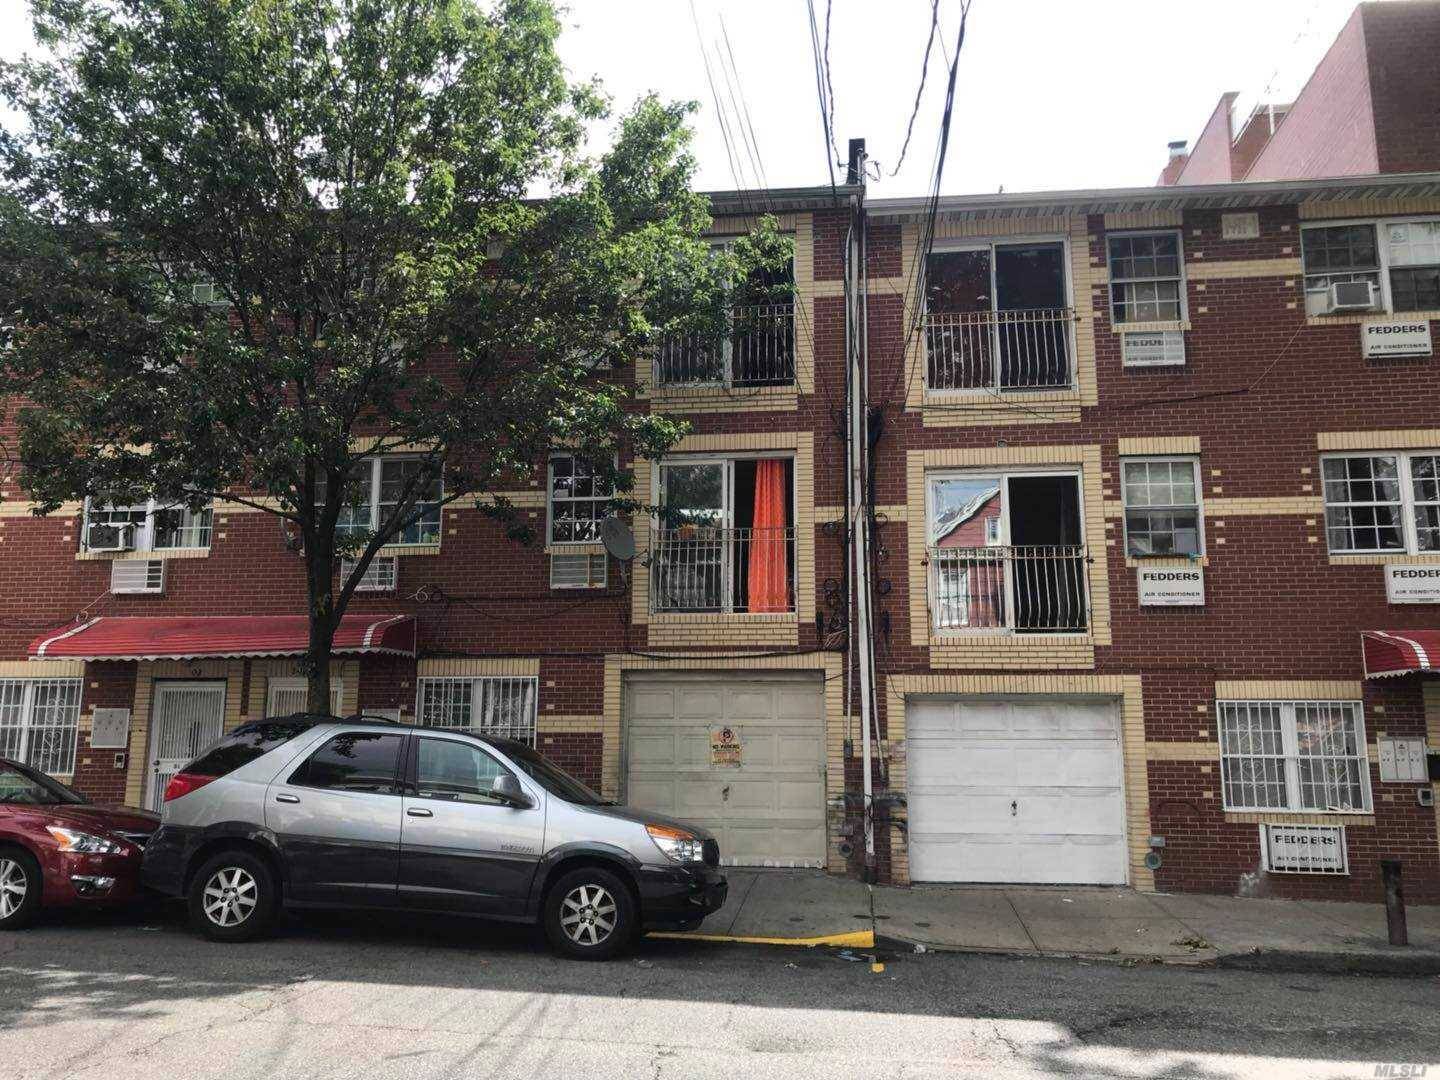 Younger Attached 3 Family Great Investment Property Located At Corona Closed To 7 Train Station.